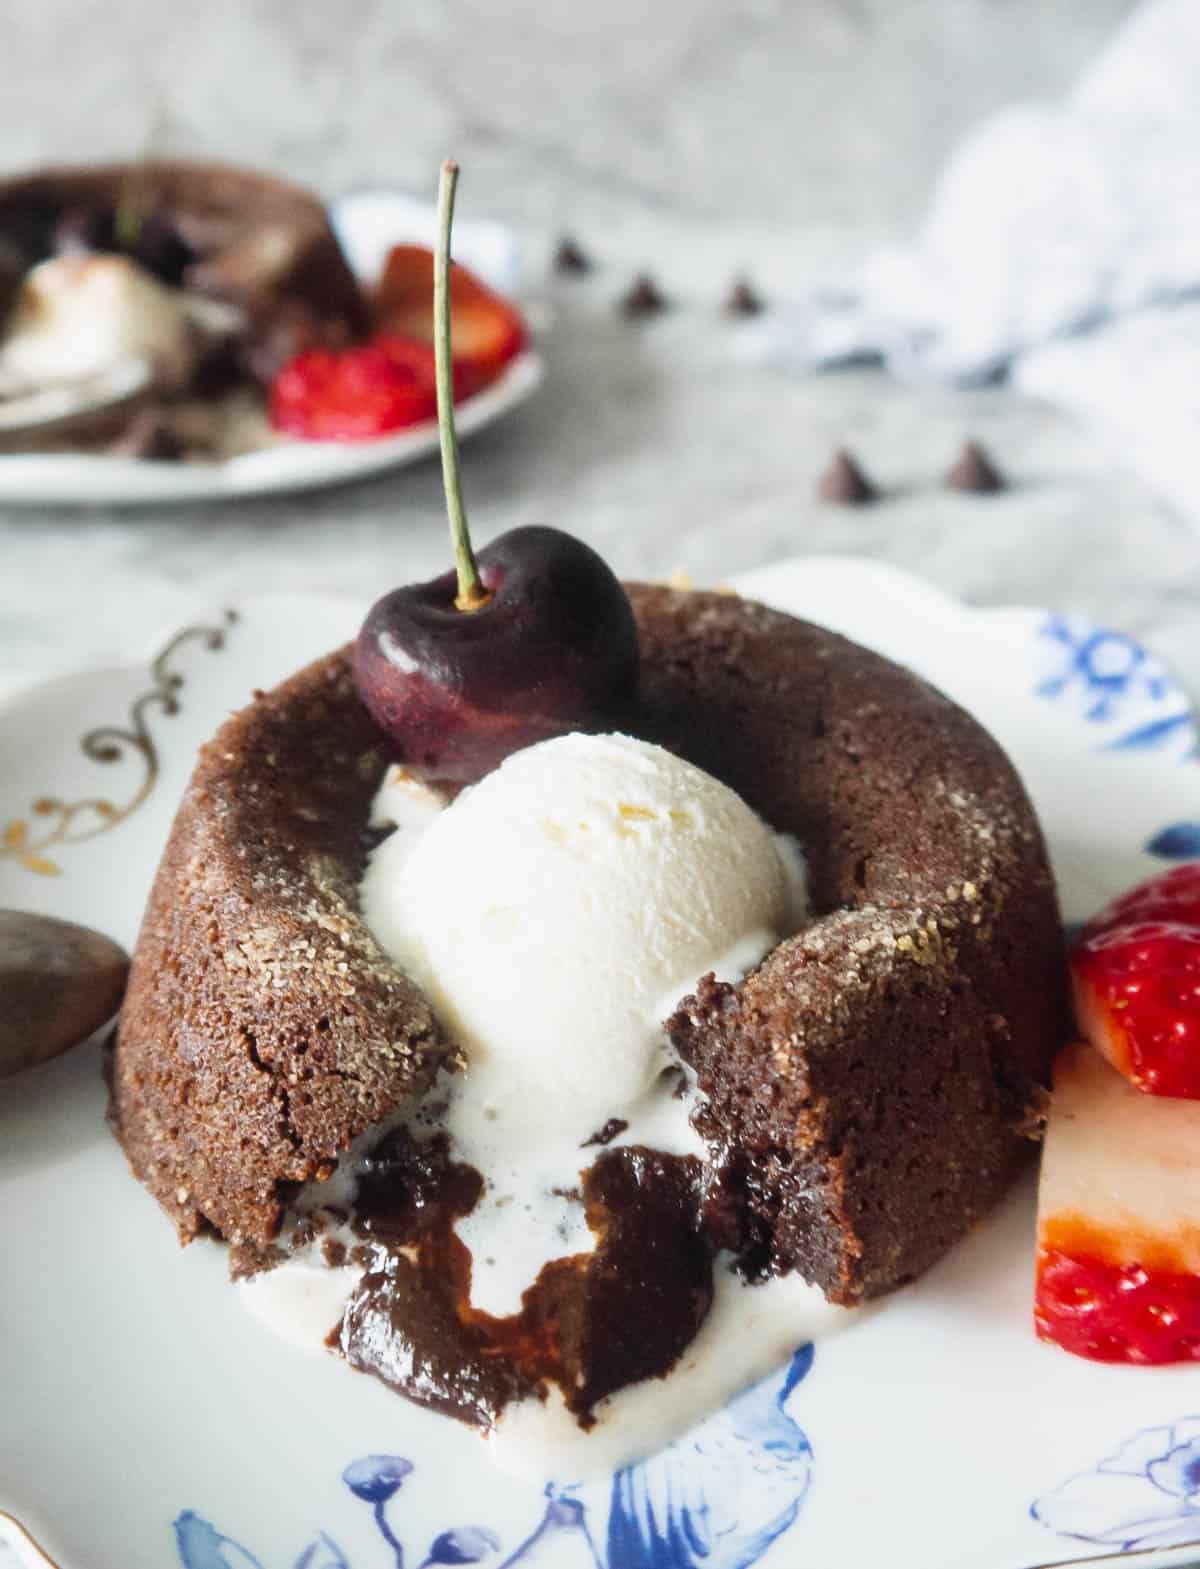 Gluten-free chocolate molten lava cake, with melted center coming out and topped in ice-cream that is melting.